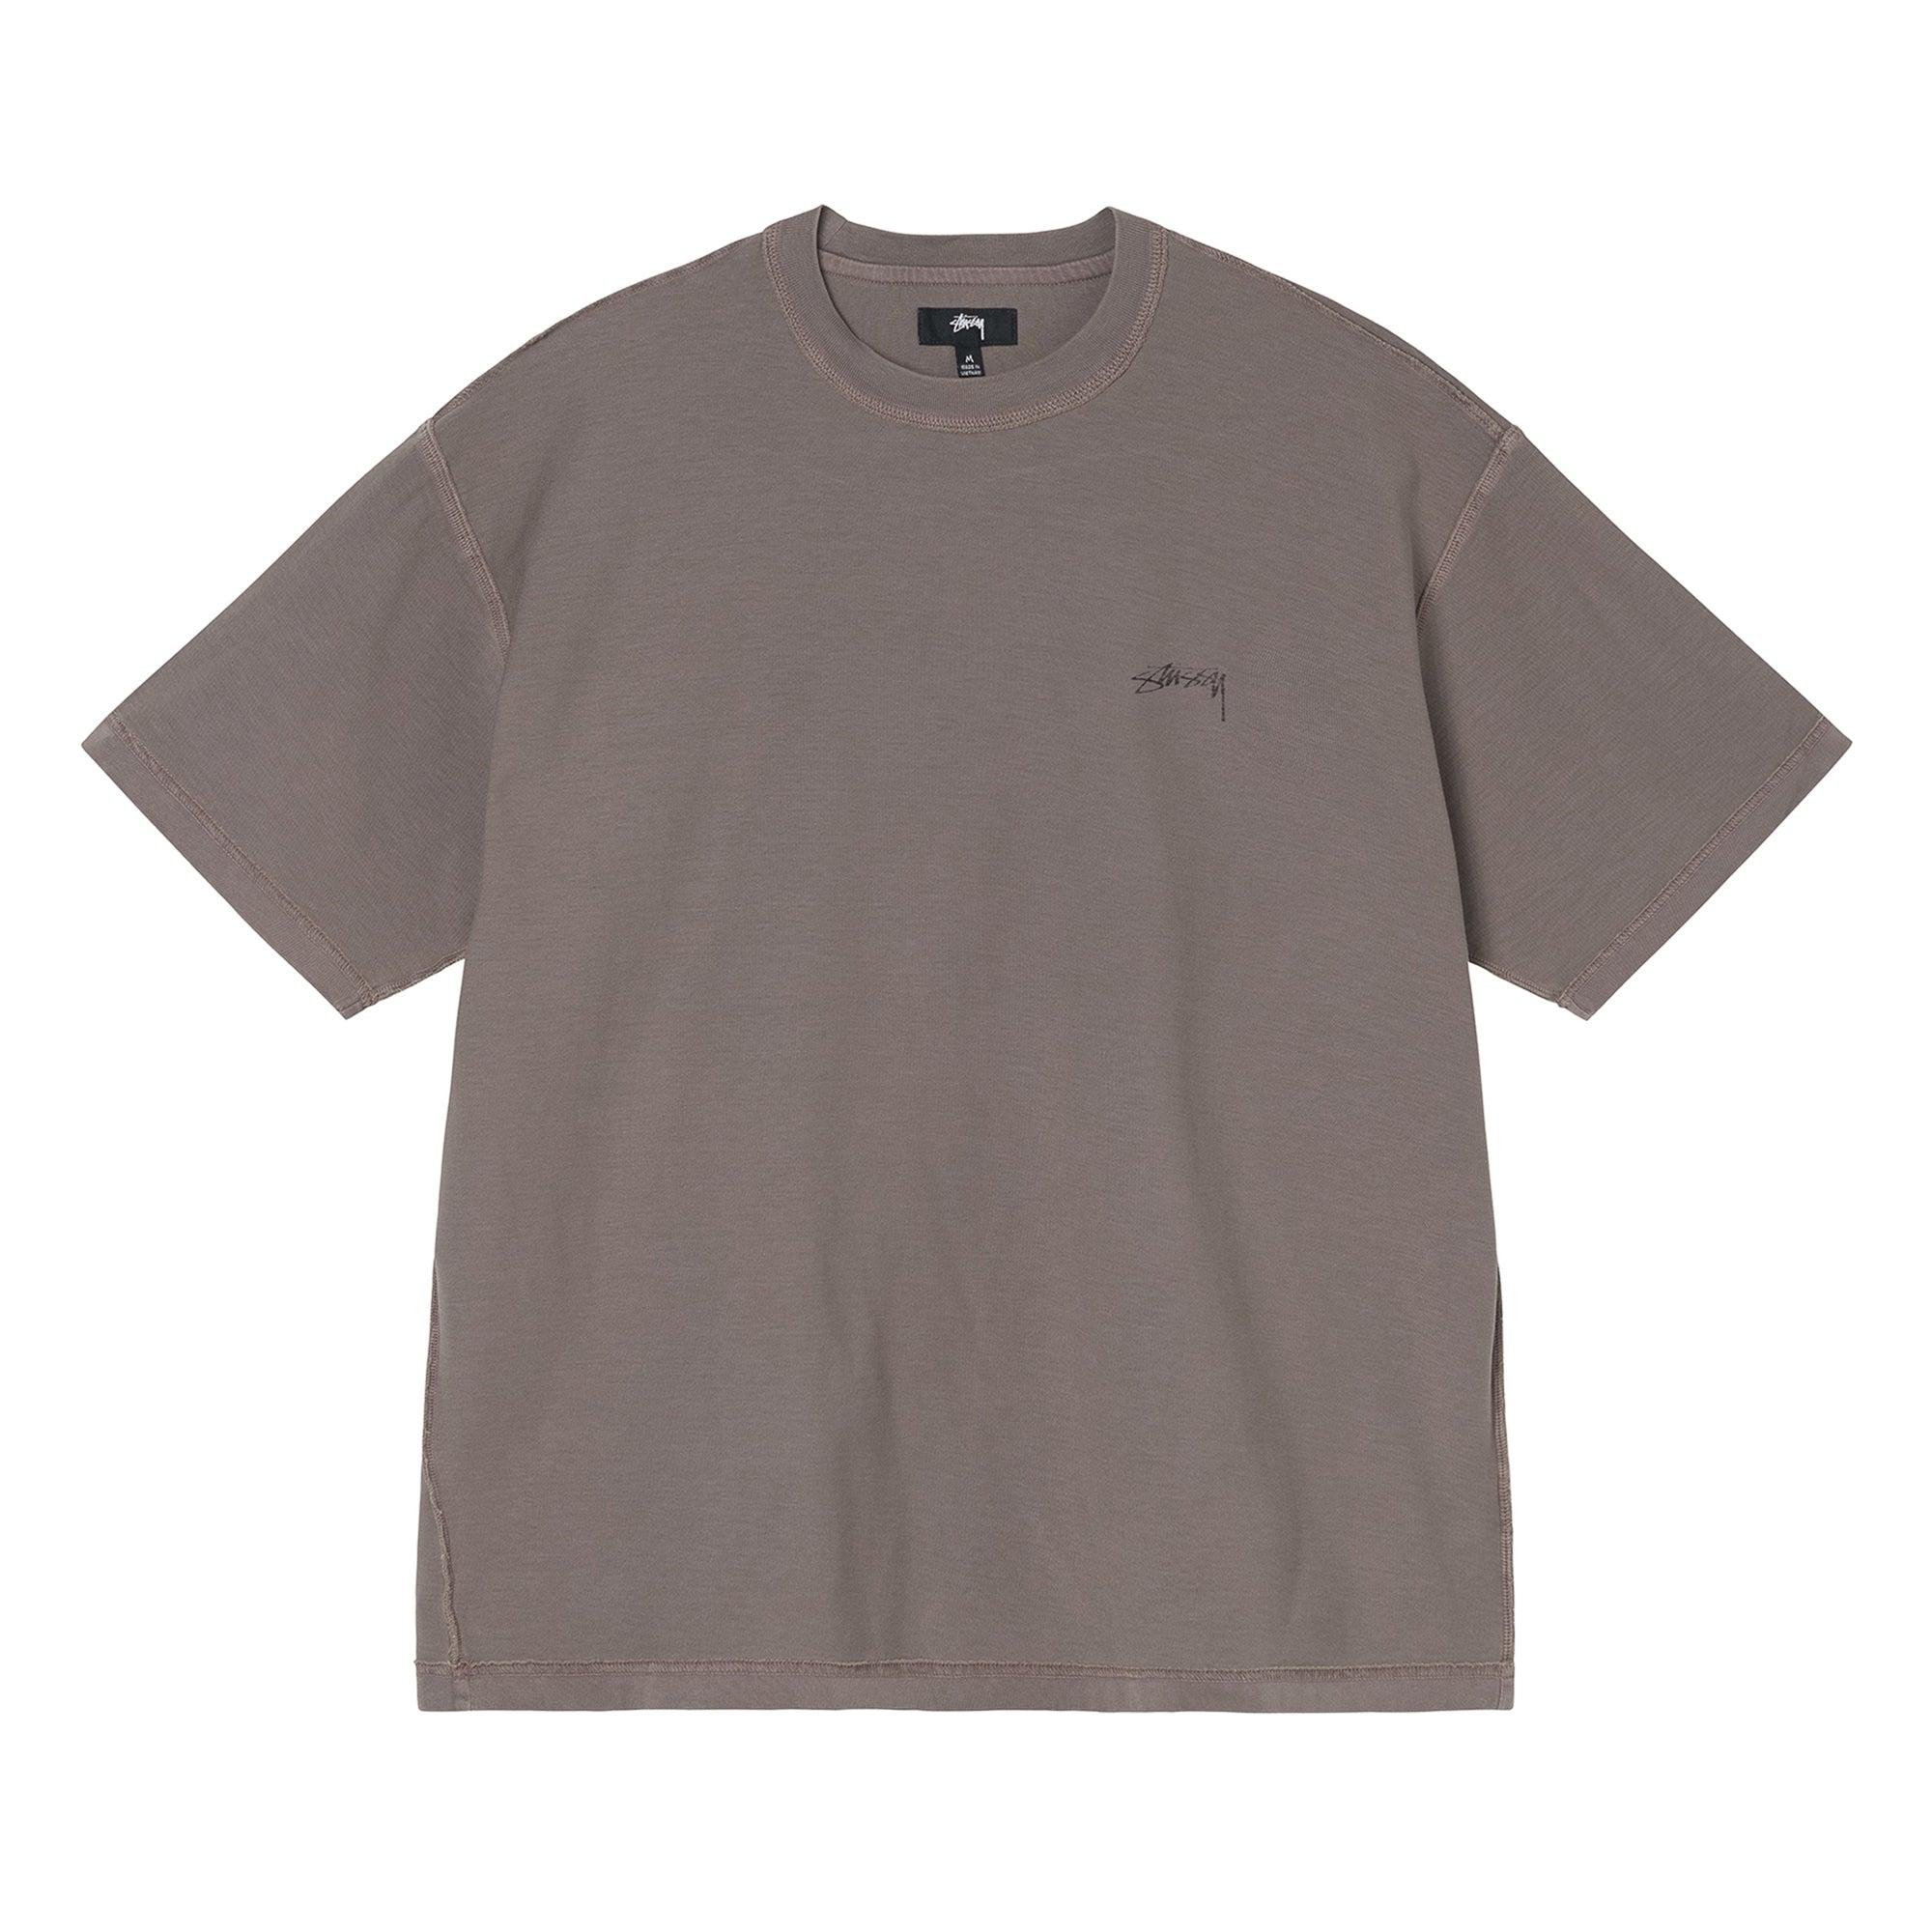 Stüssy - Pigment Dyed Inside Out Crew - (Brown) by STUSSY